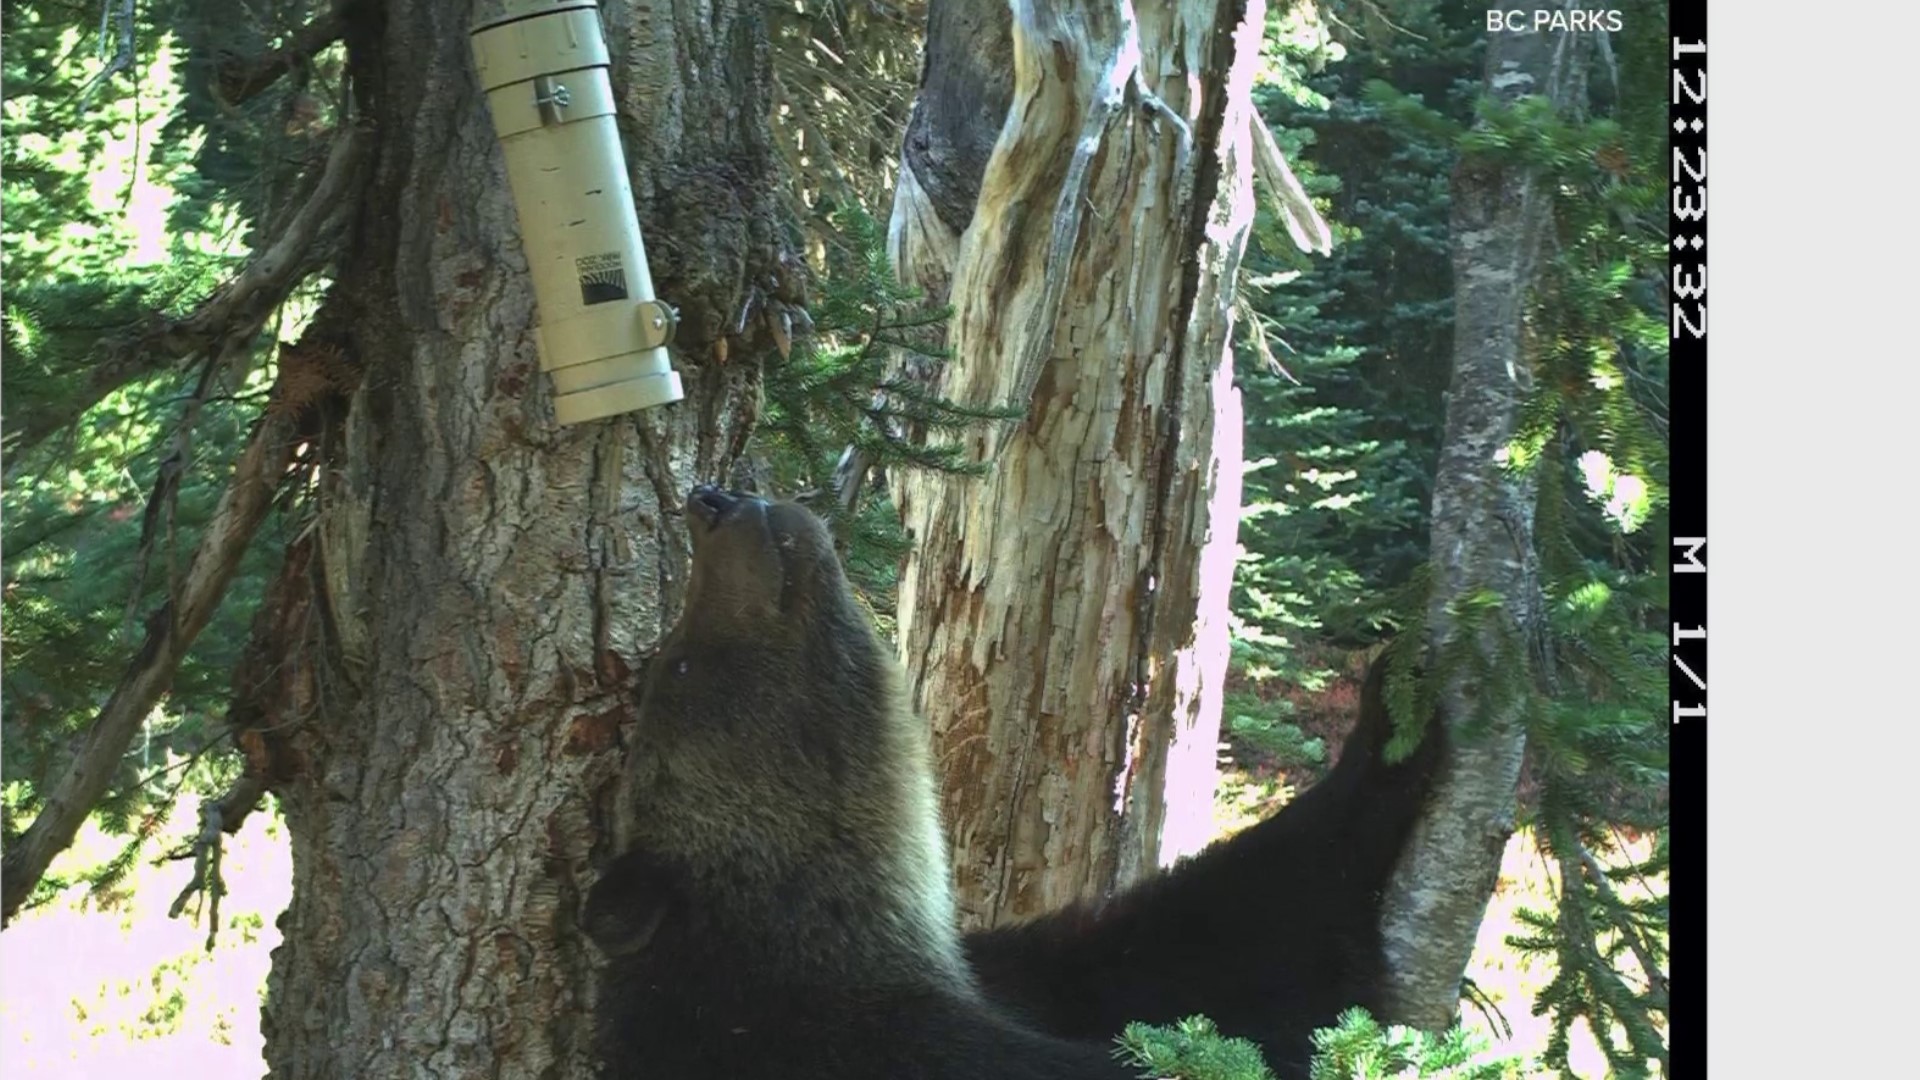 Woodland Park Zoo co-develops scent lure that helps capture photos of rare animals and helps researchers. #k5evening